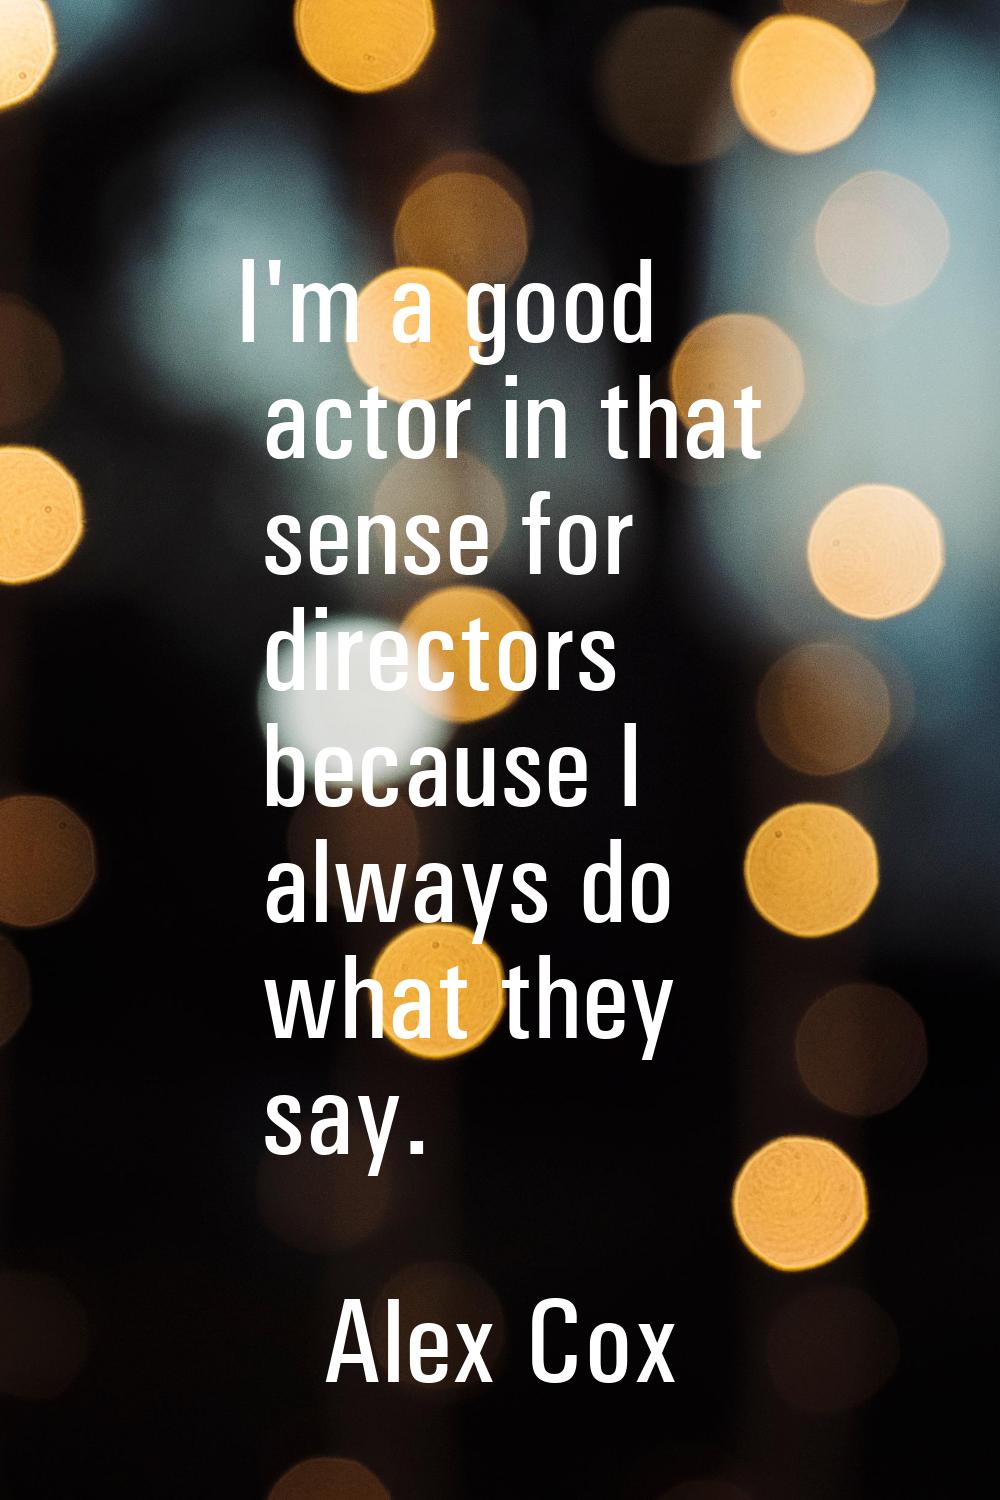 I'm a good actor in that sense for directors because I always do what they say.